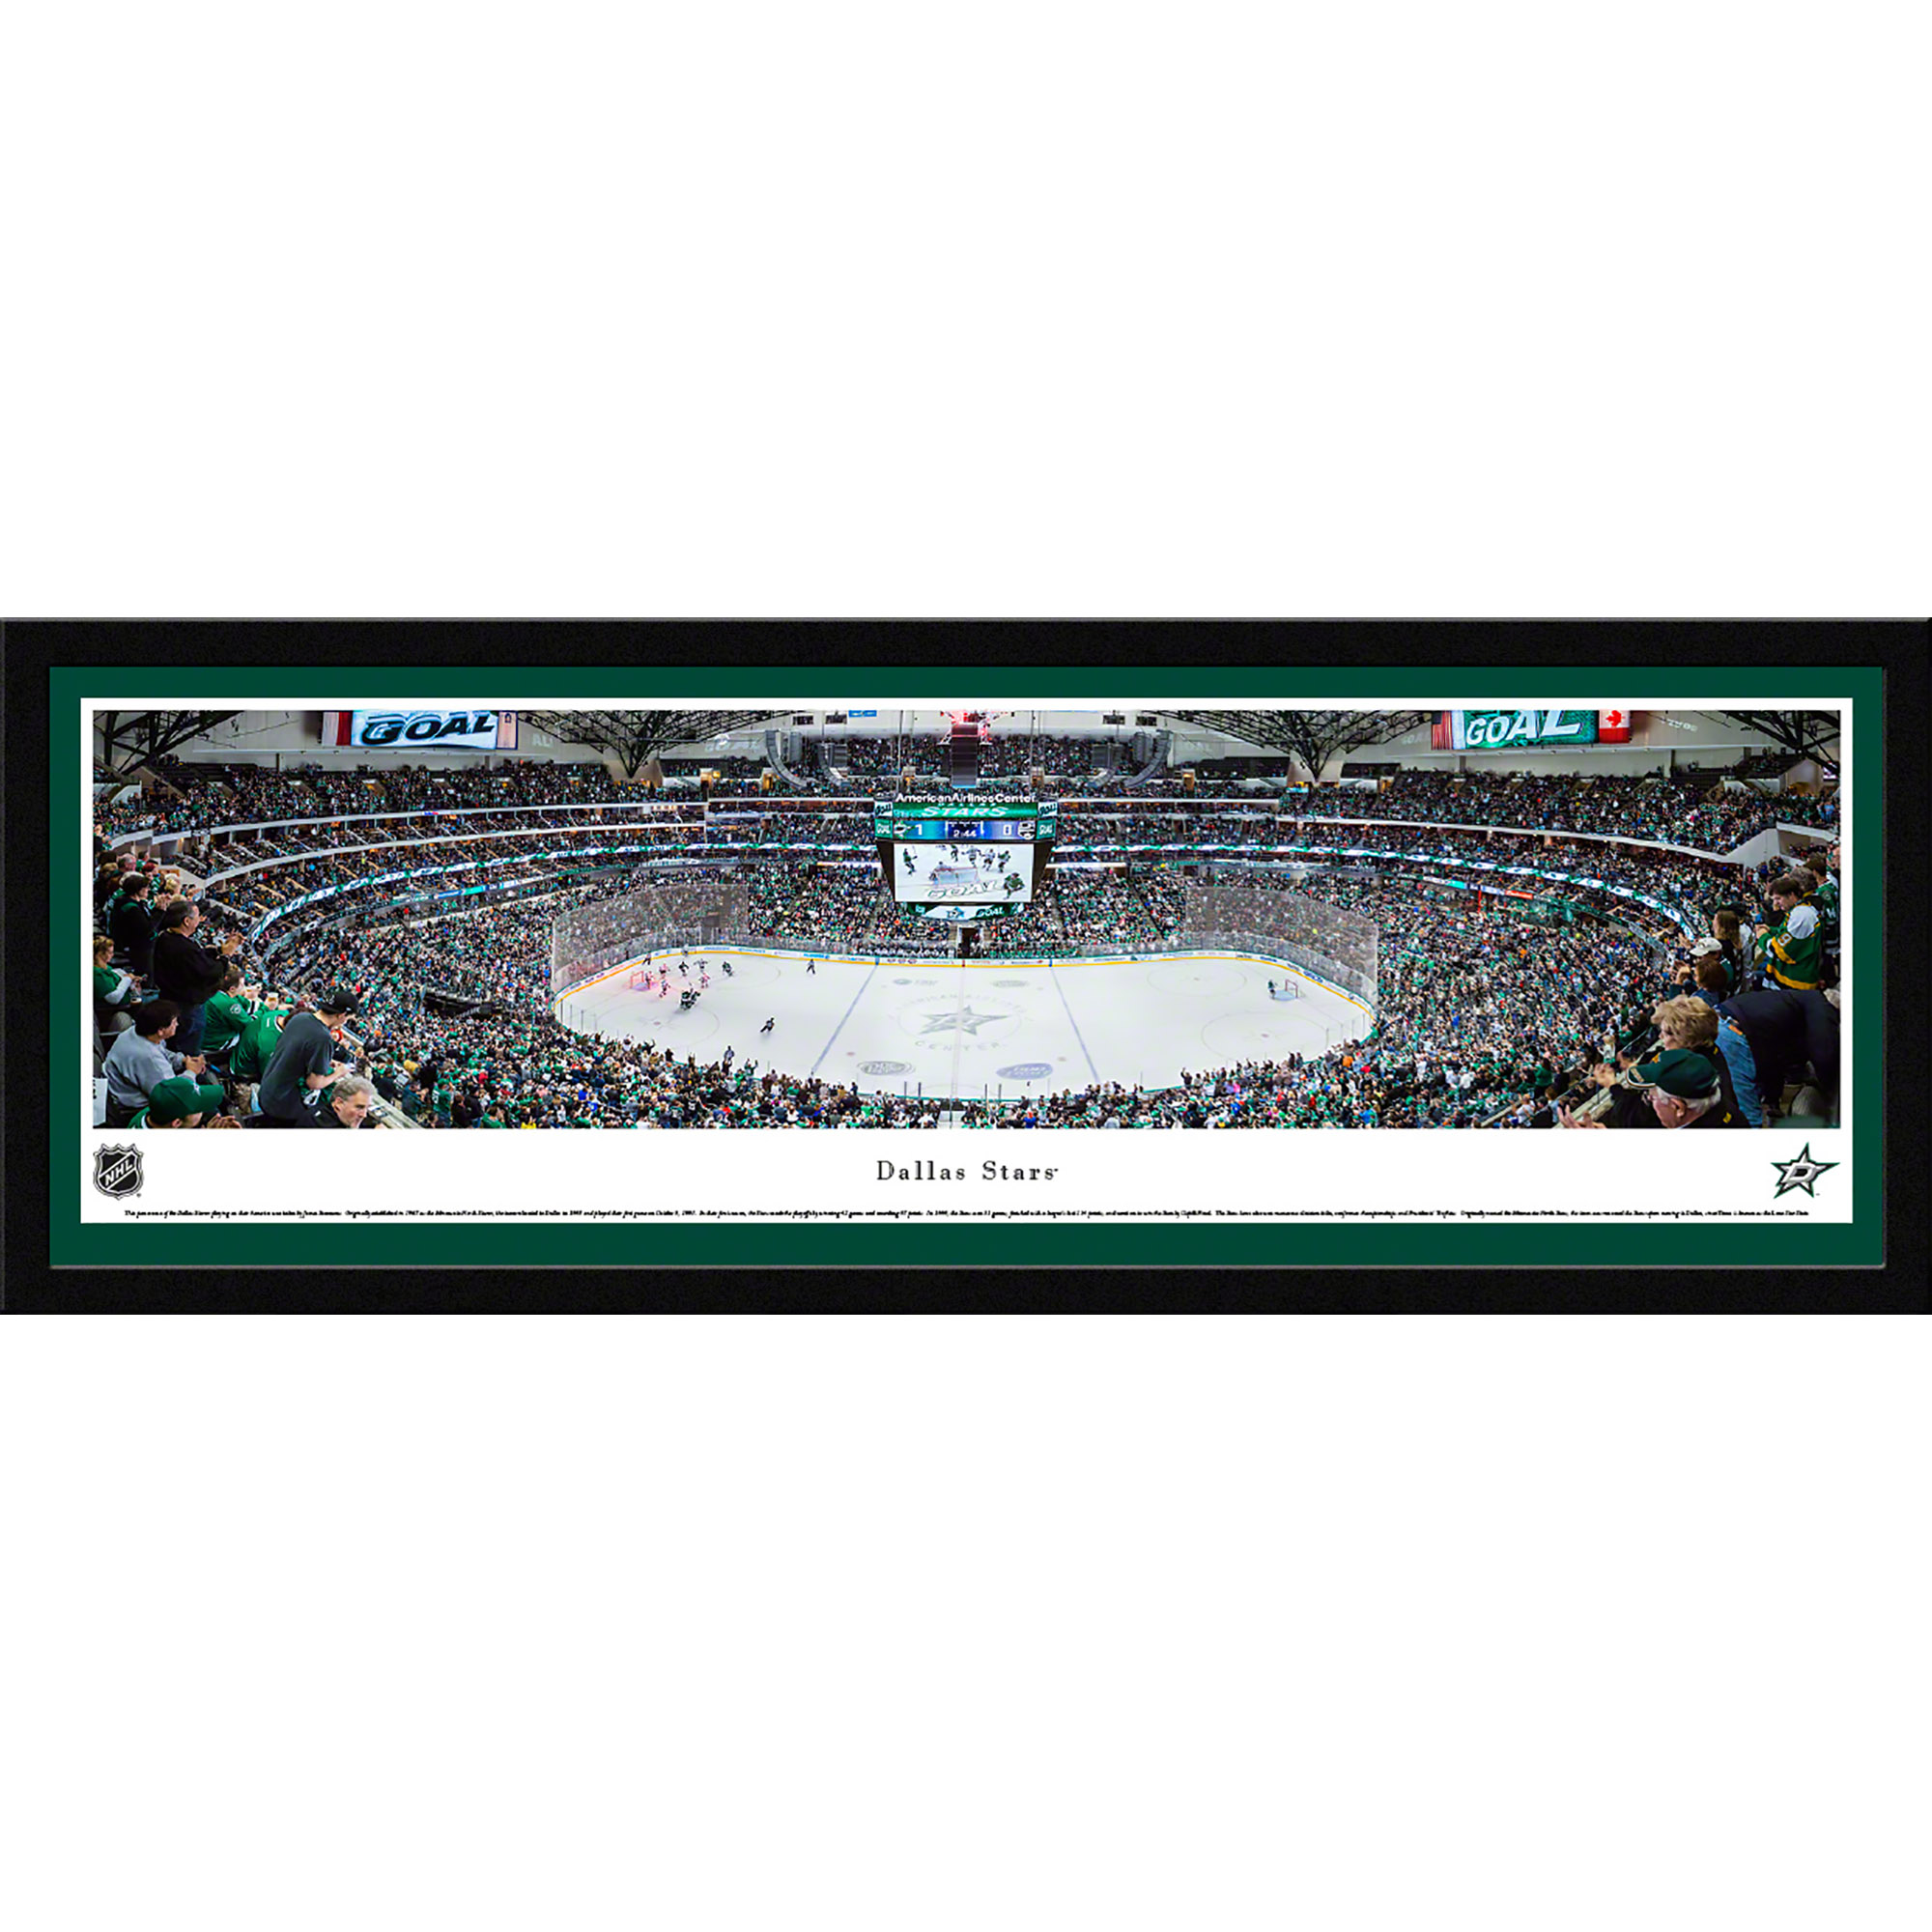 Dallas Stars -Center Ice at American Airlines Center - Blakeway Panoramas NHL Print with Select Frame and Single Mat - image 1 of 1